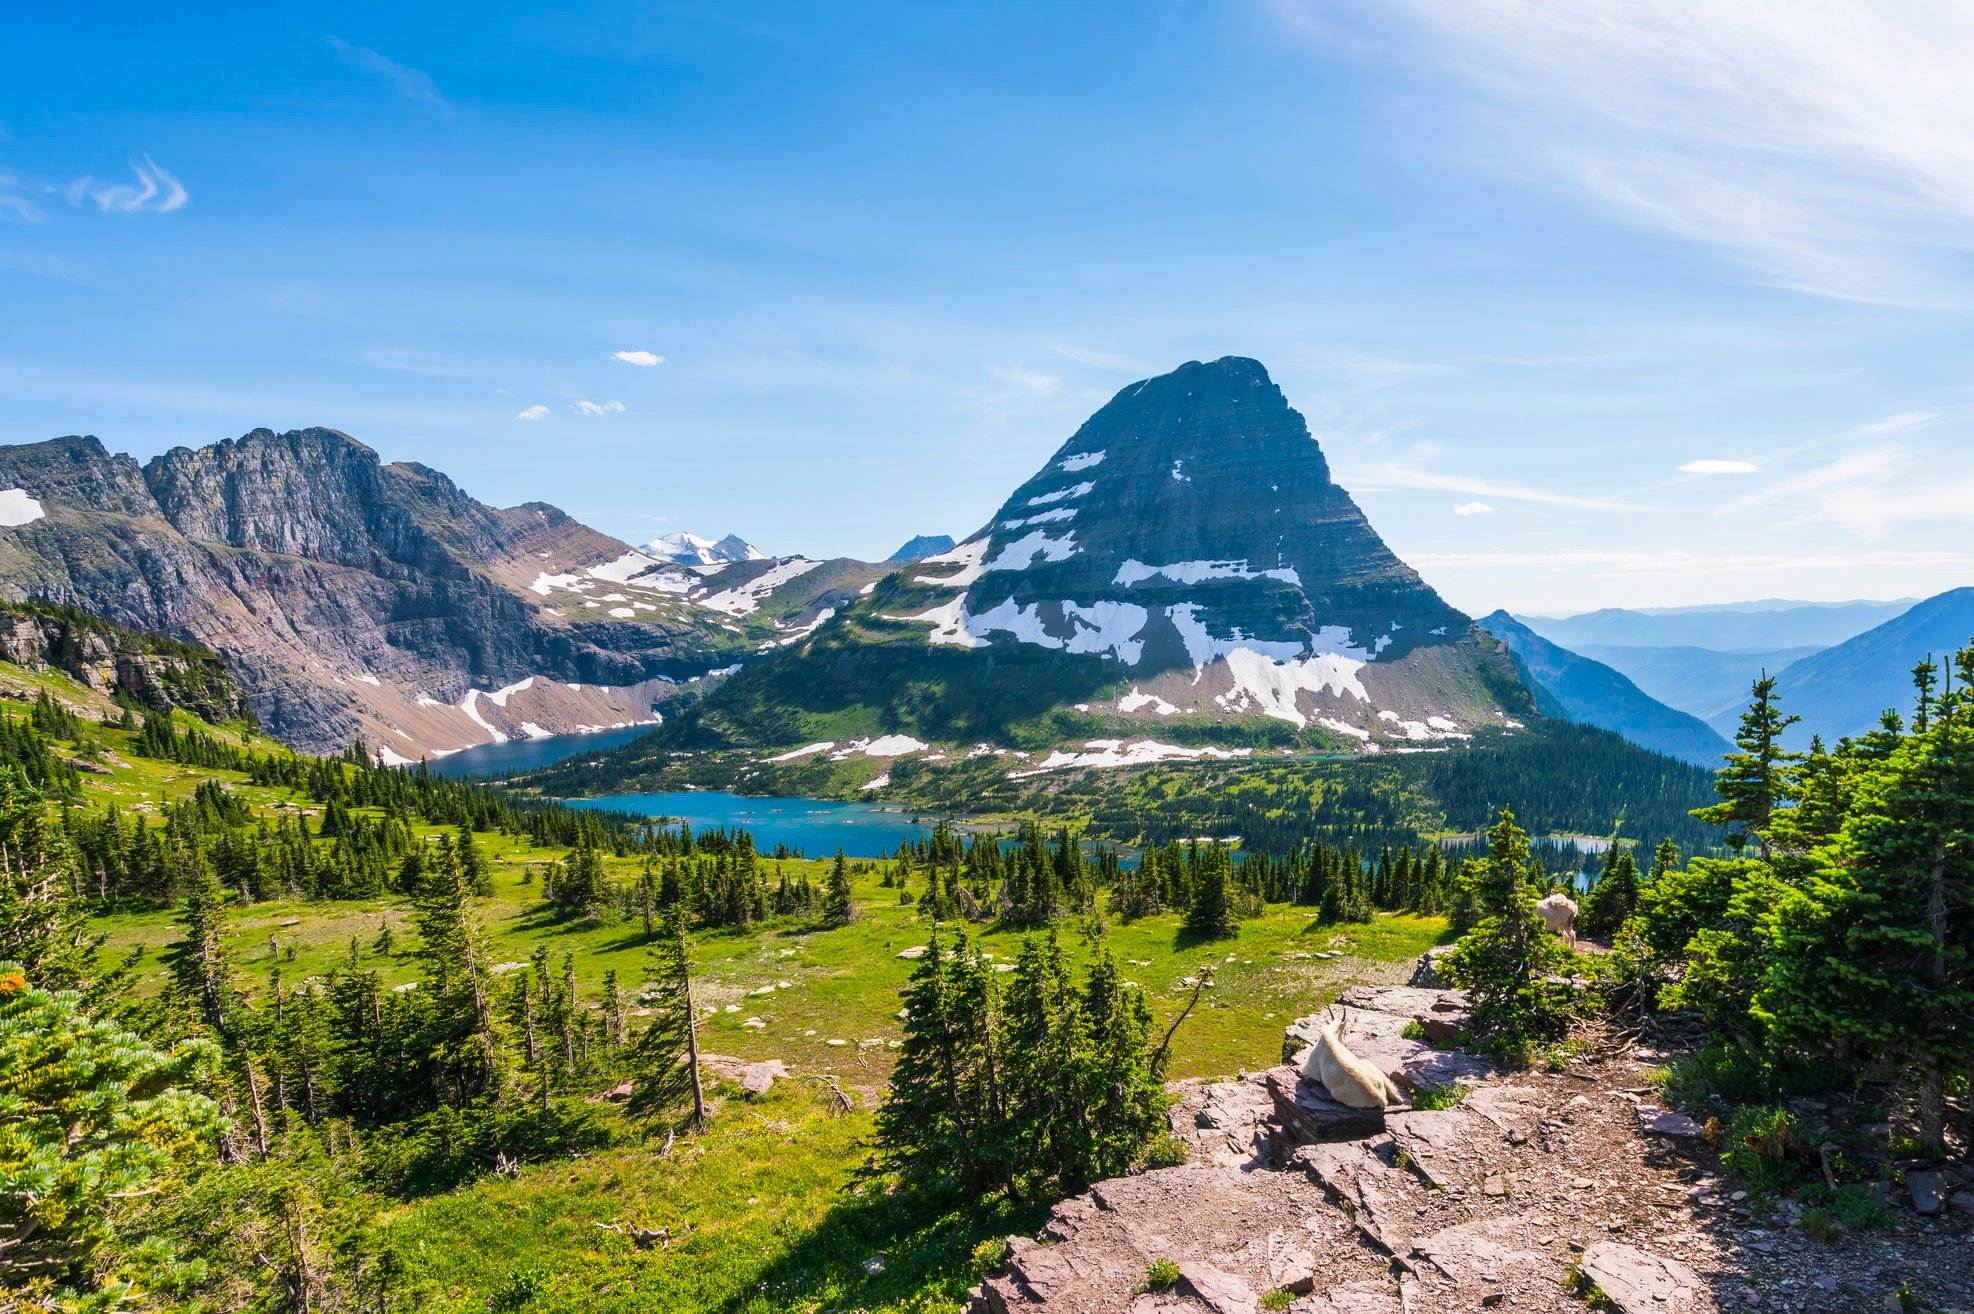 logan pass trail in Glacier national park on a sunny day, Montana, usa.